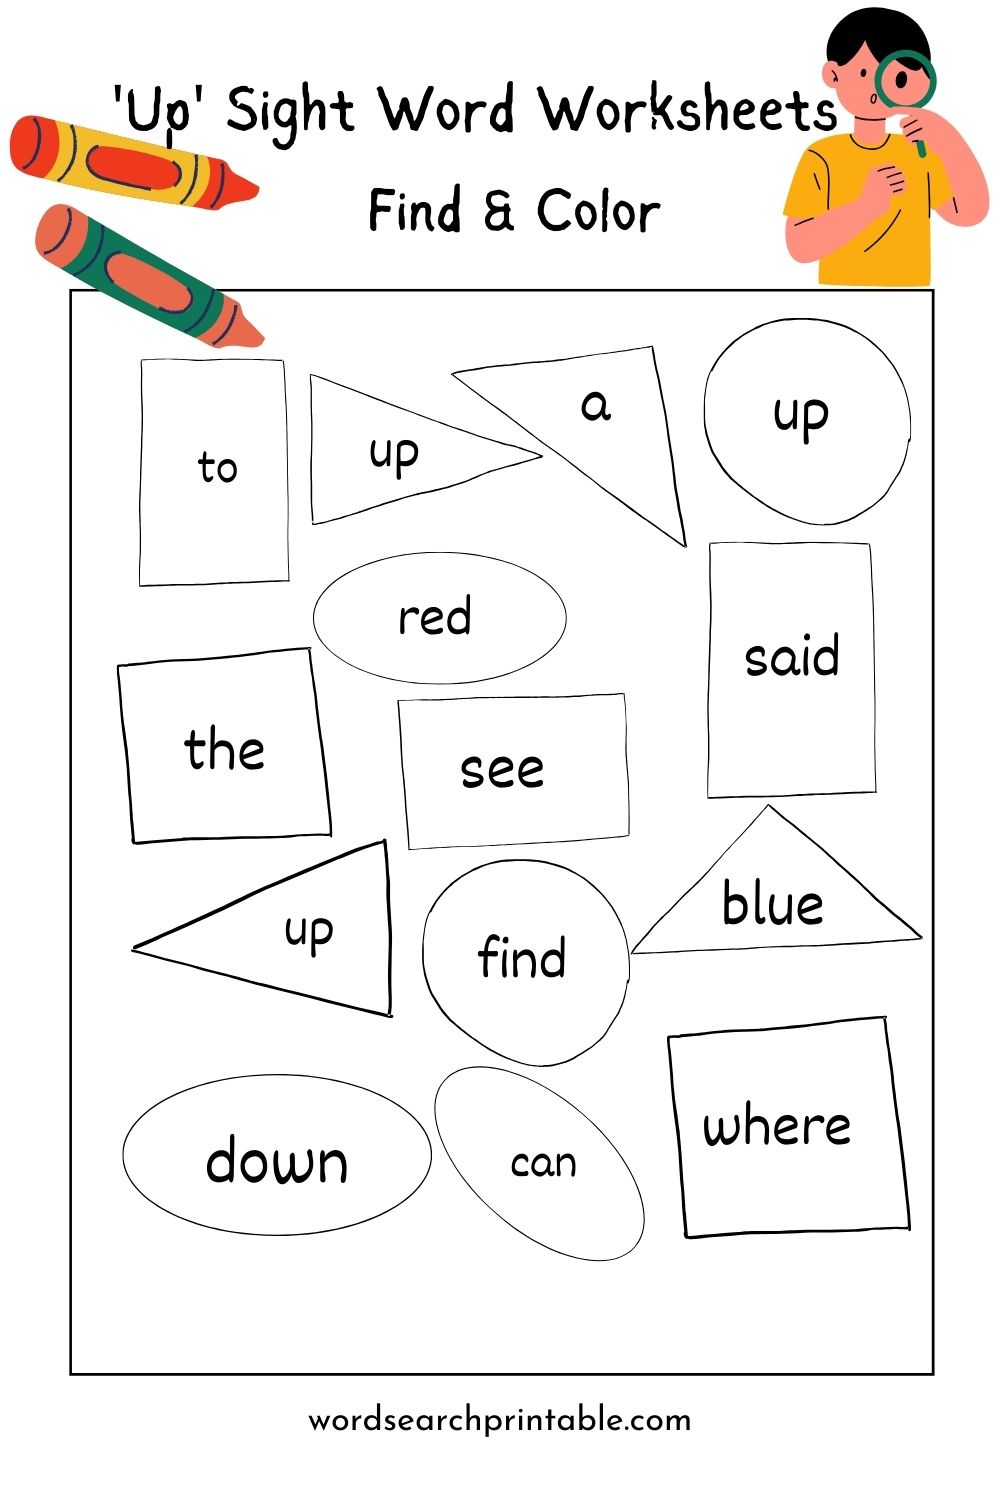 Find sight word Up and Color the geometric shape - Word hunt